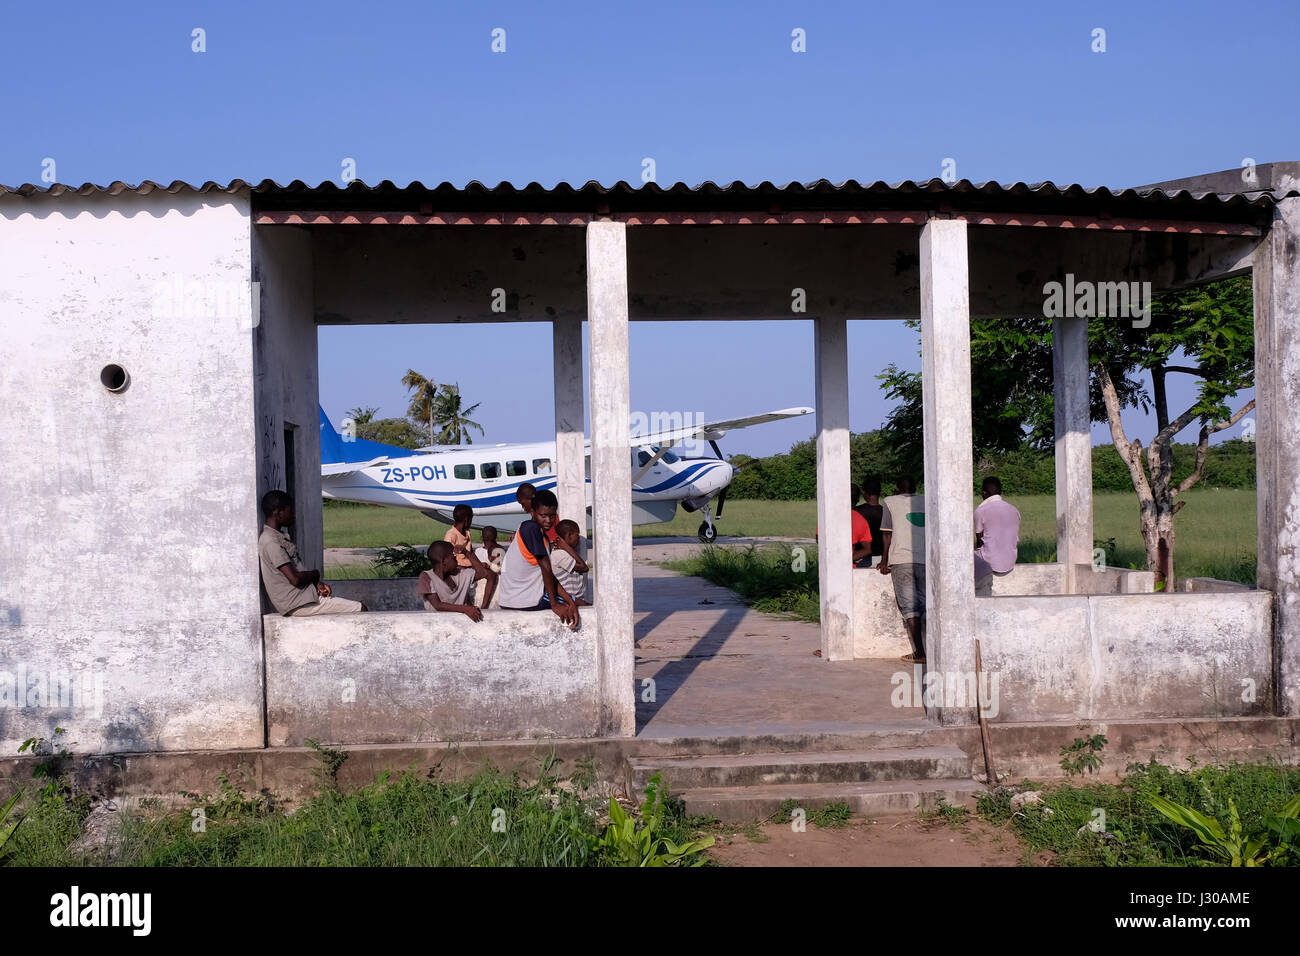 Light aircraft at the small grass runway in Ibo island one of the Quirimbas Islands in the Indian Ocean off northern Mozambique Africa Stock Photo